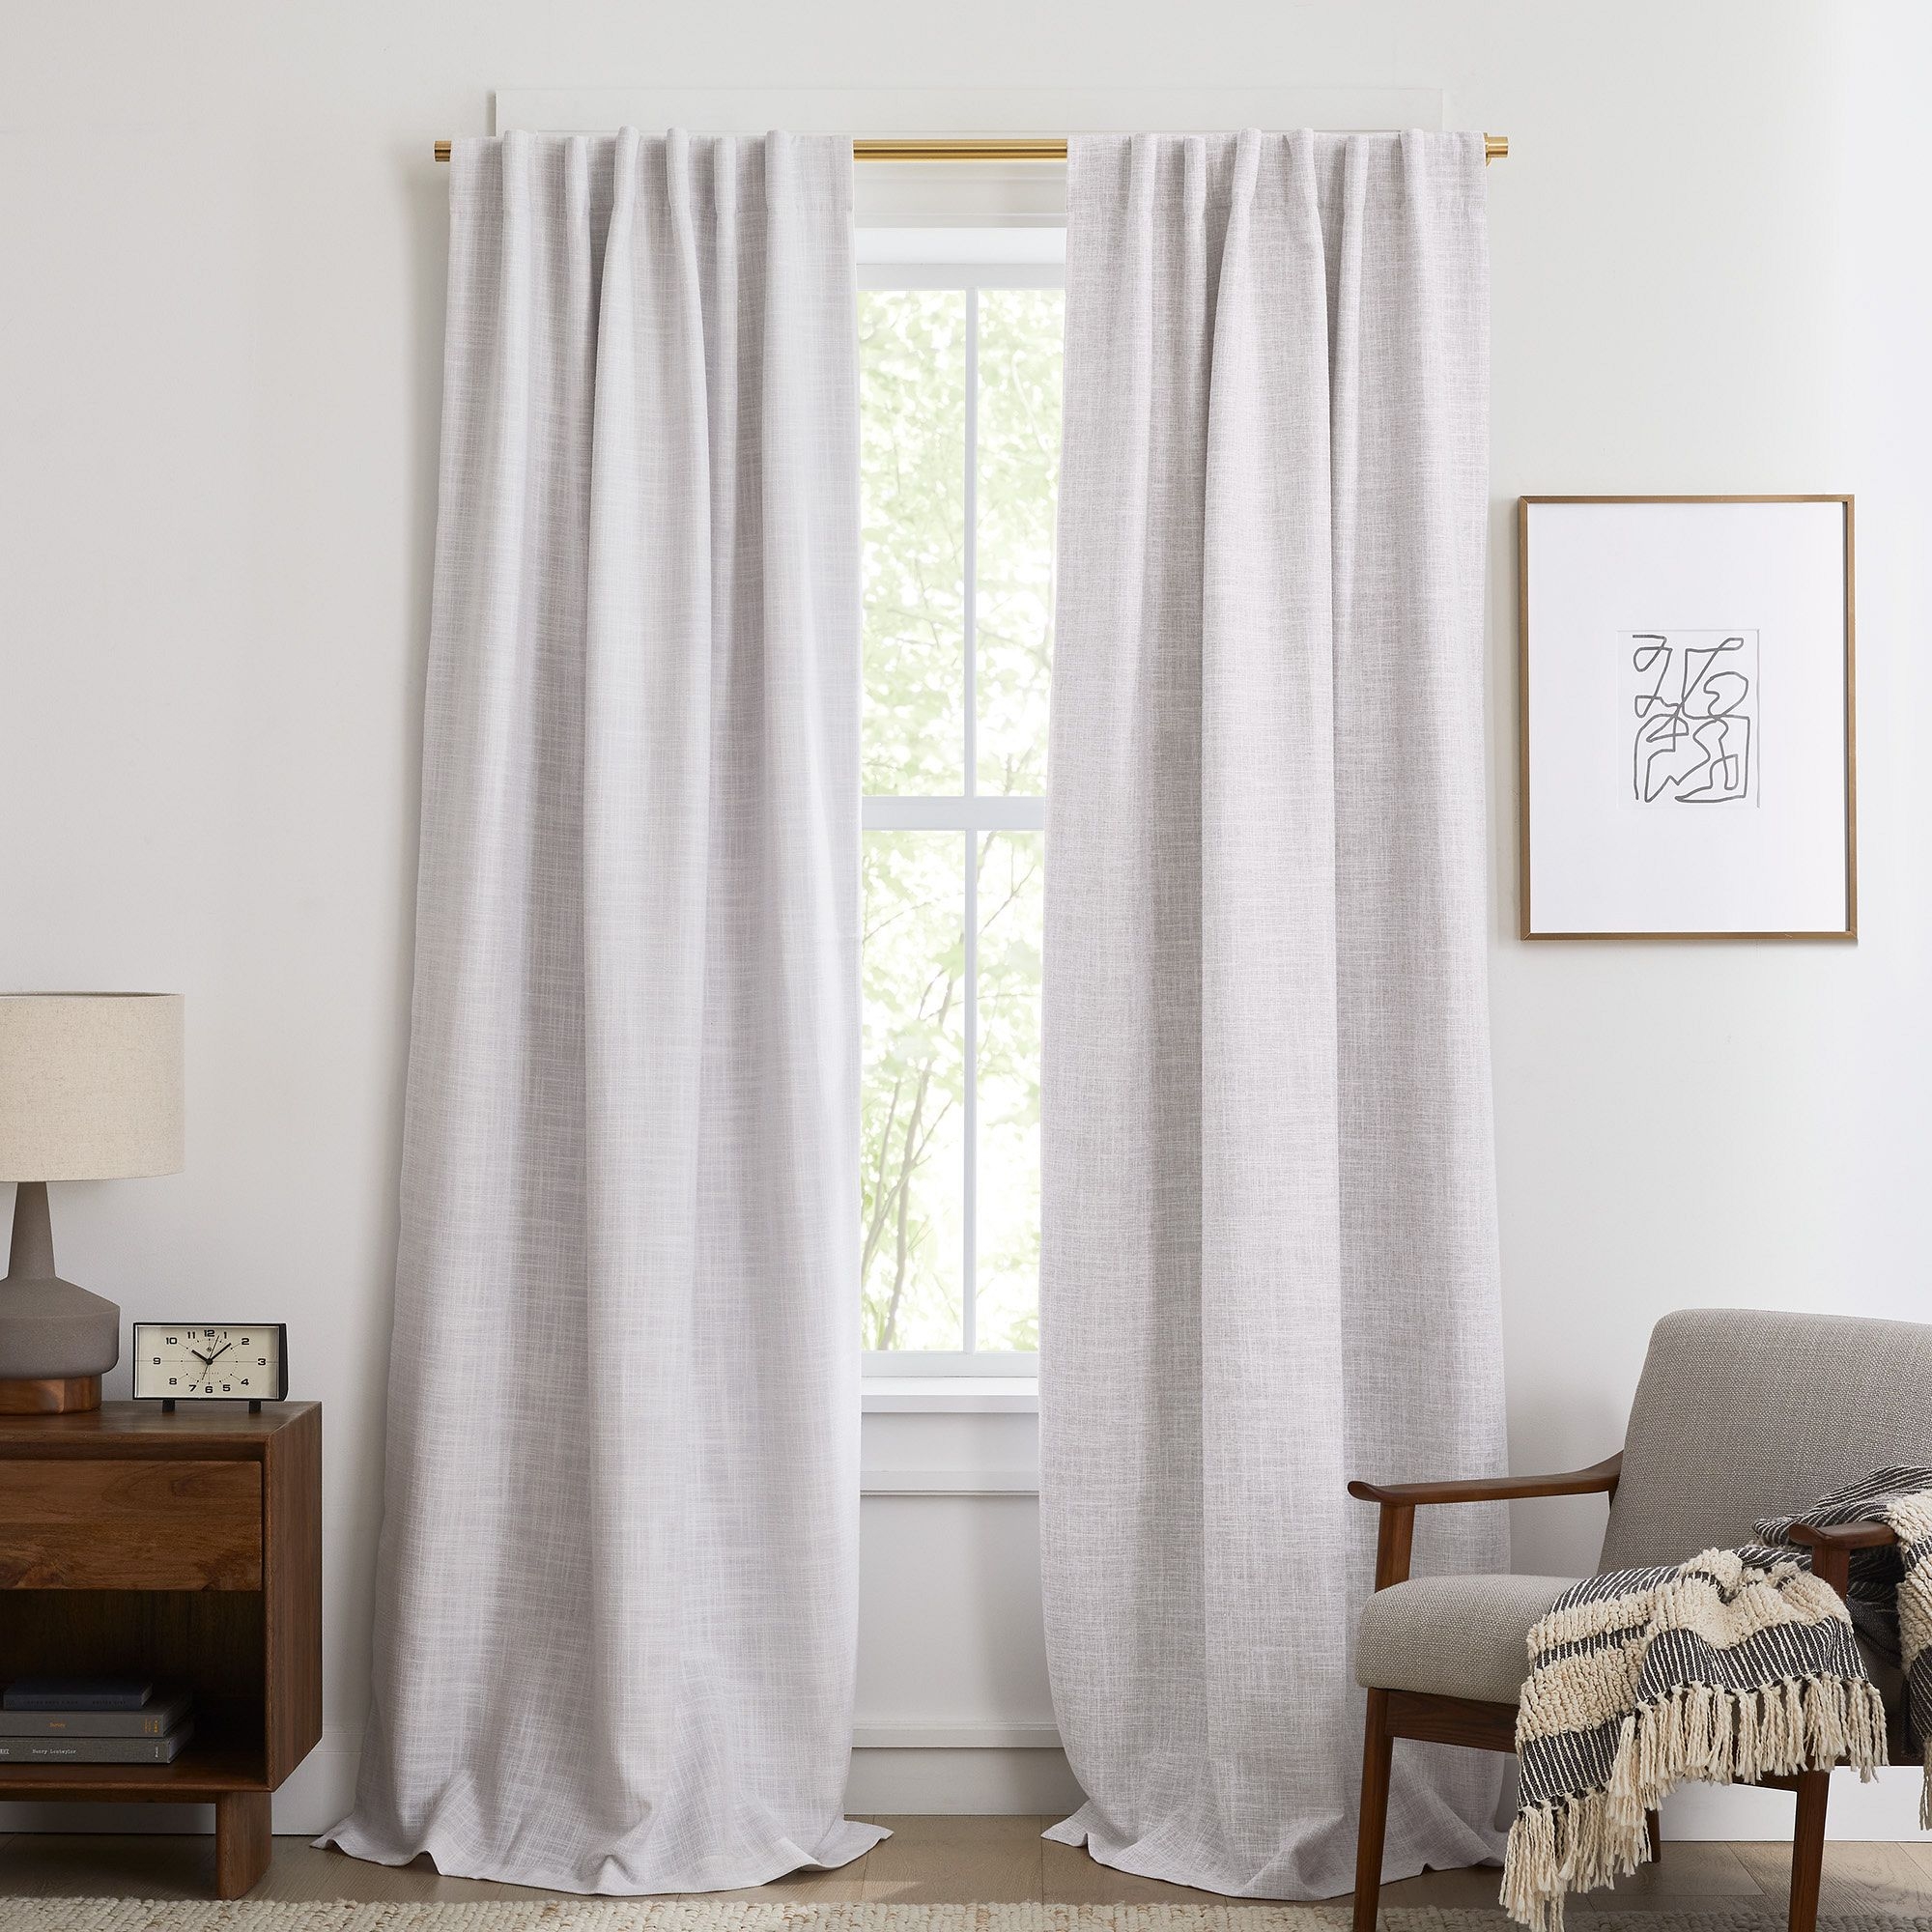 Crossweave Curtain with Blackout Lining, Stone White, 48"x84", Set of 2 - Image 1